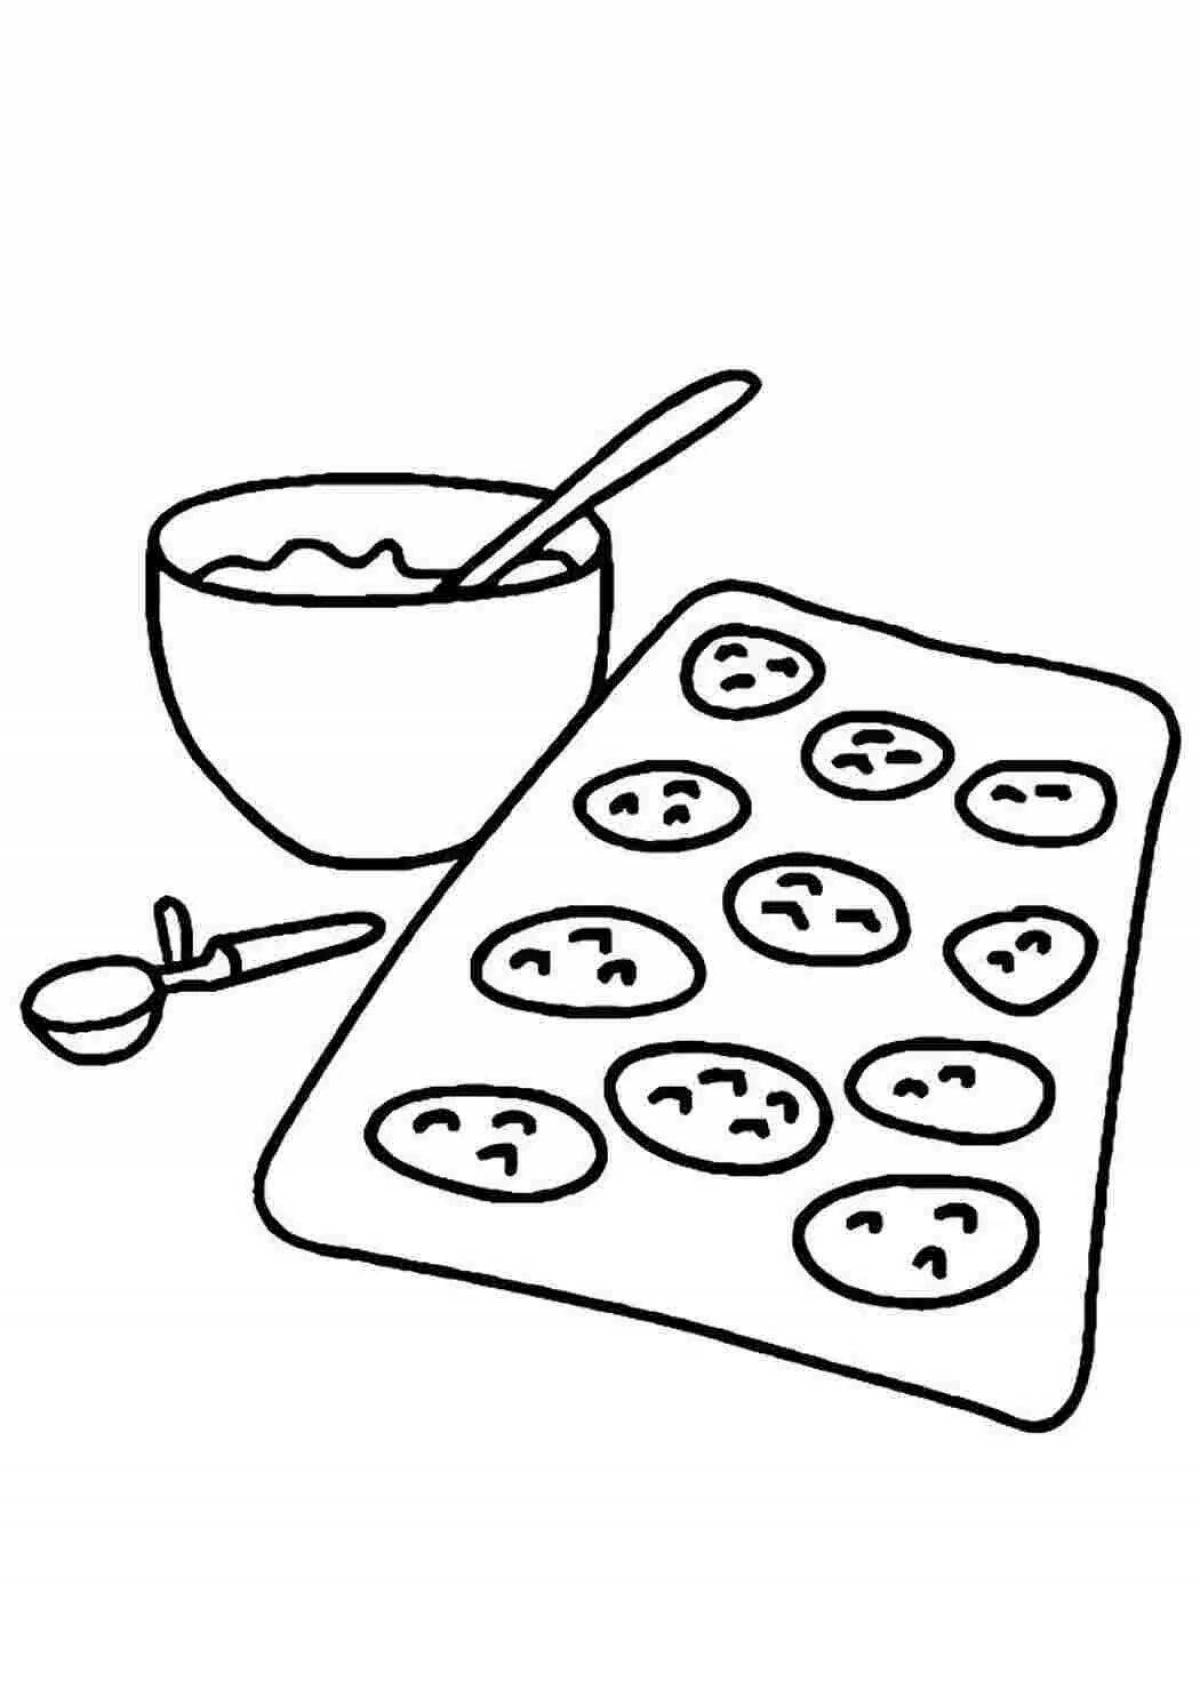 Playful cookie coloring book for kids